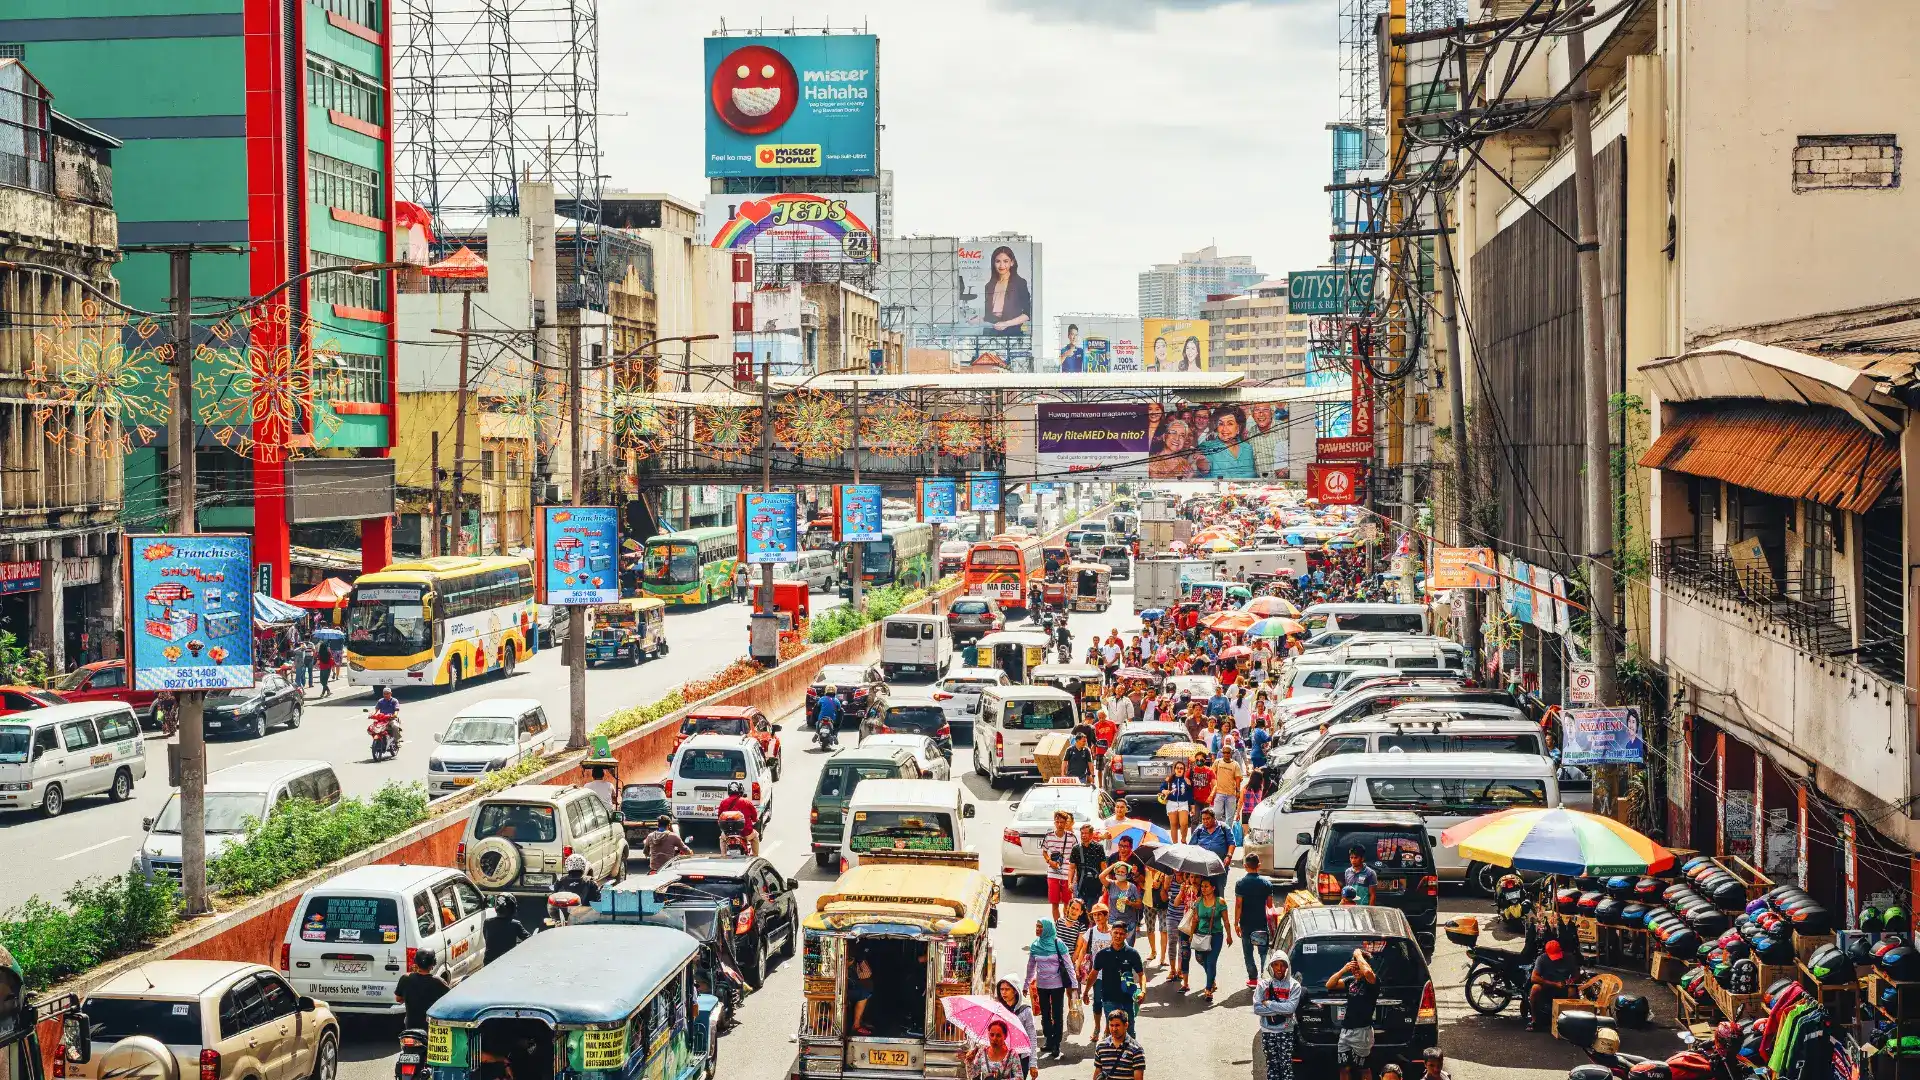 Types of Outdoor Advertising in The Philippines